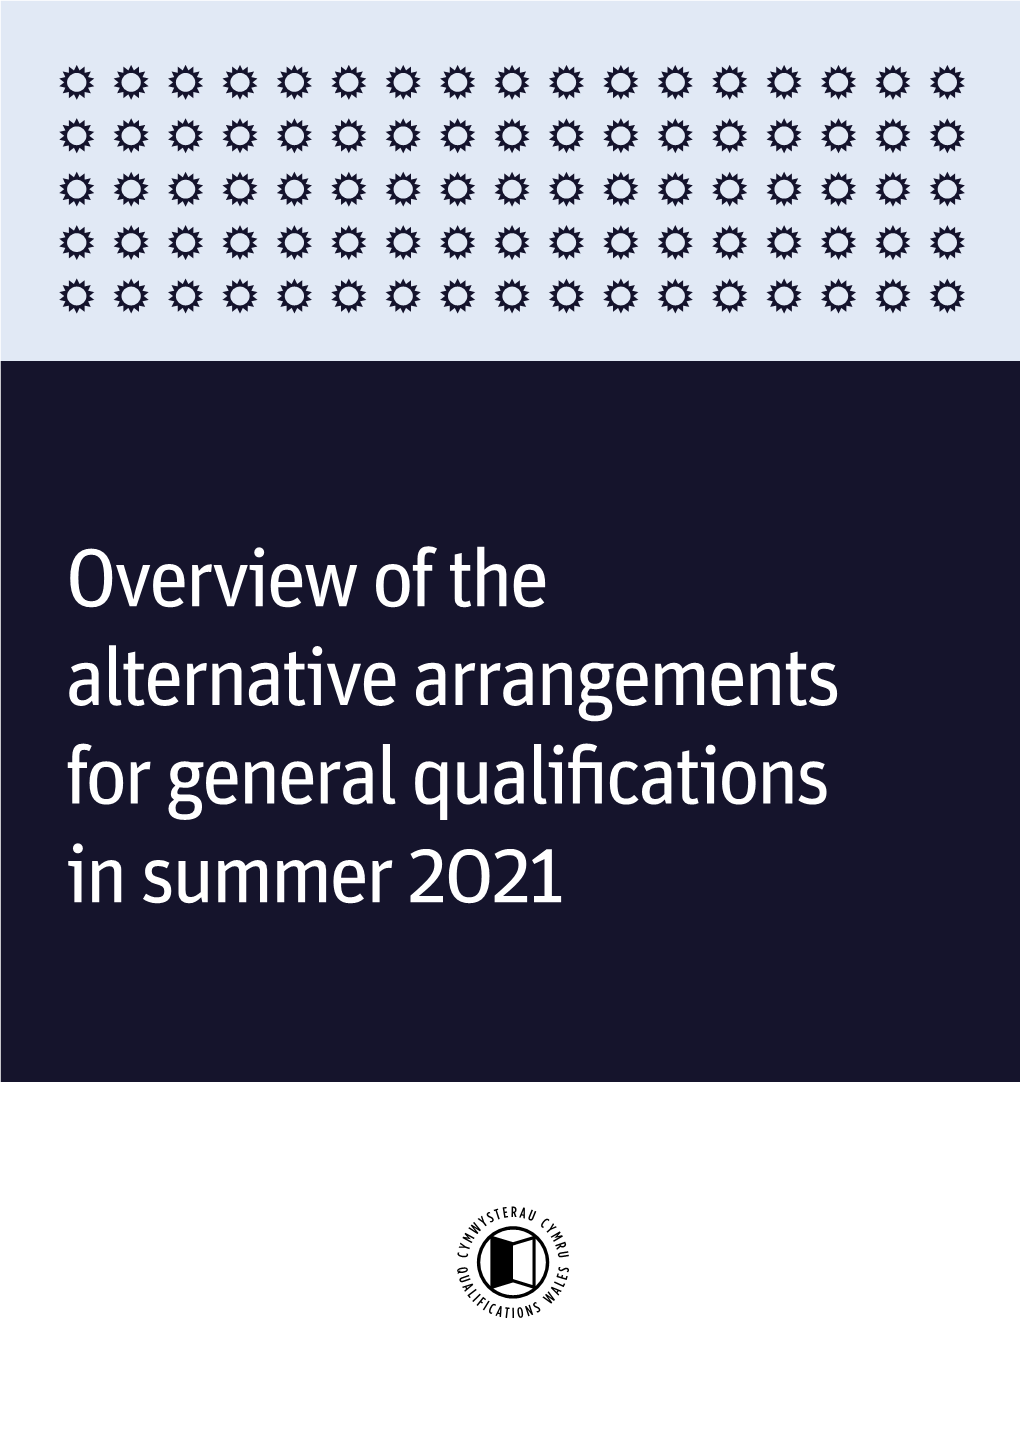 Overview of the Alternative Arrangements for General Qualifications in Summer 2021 Contents1